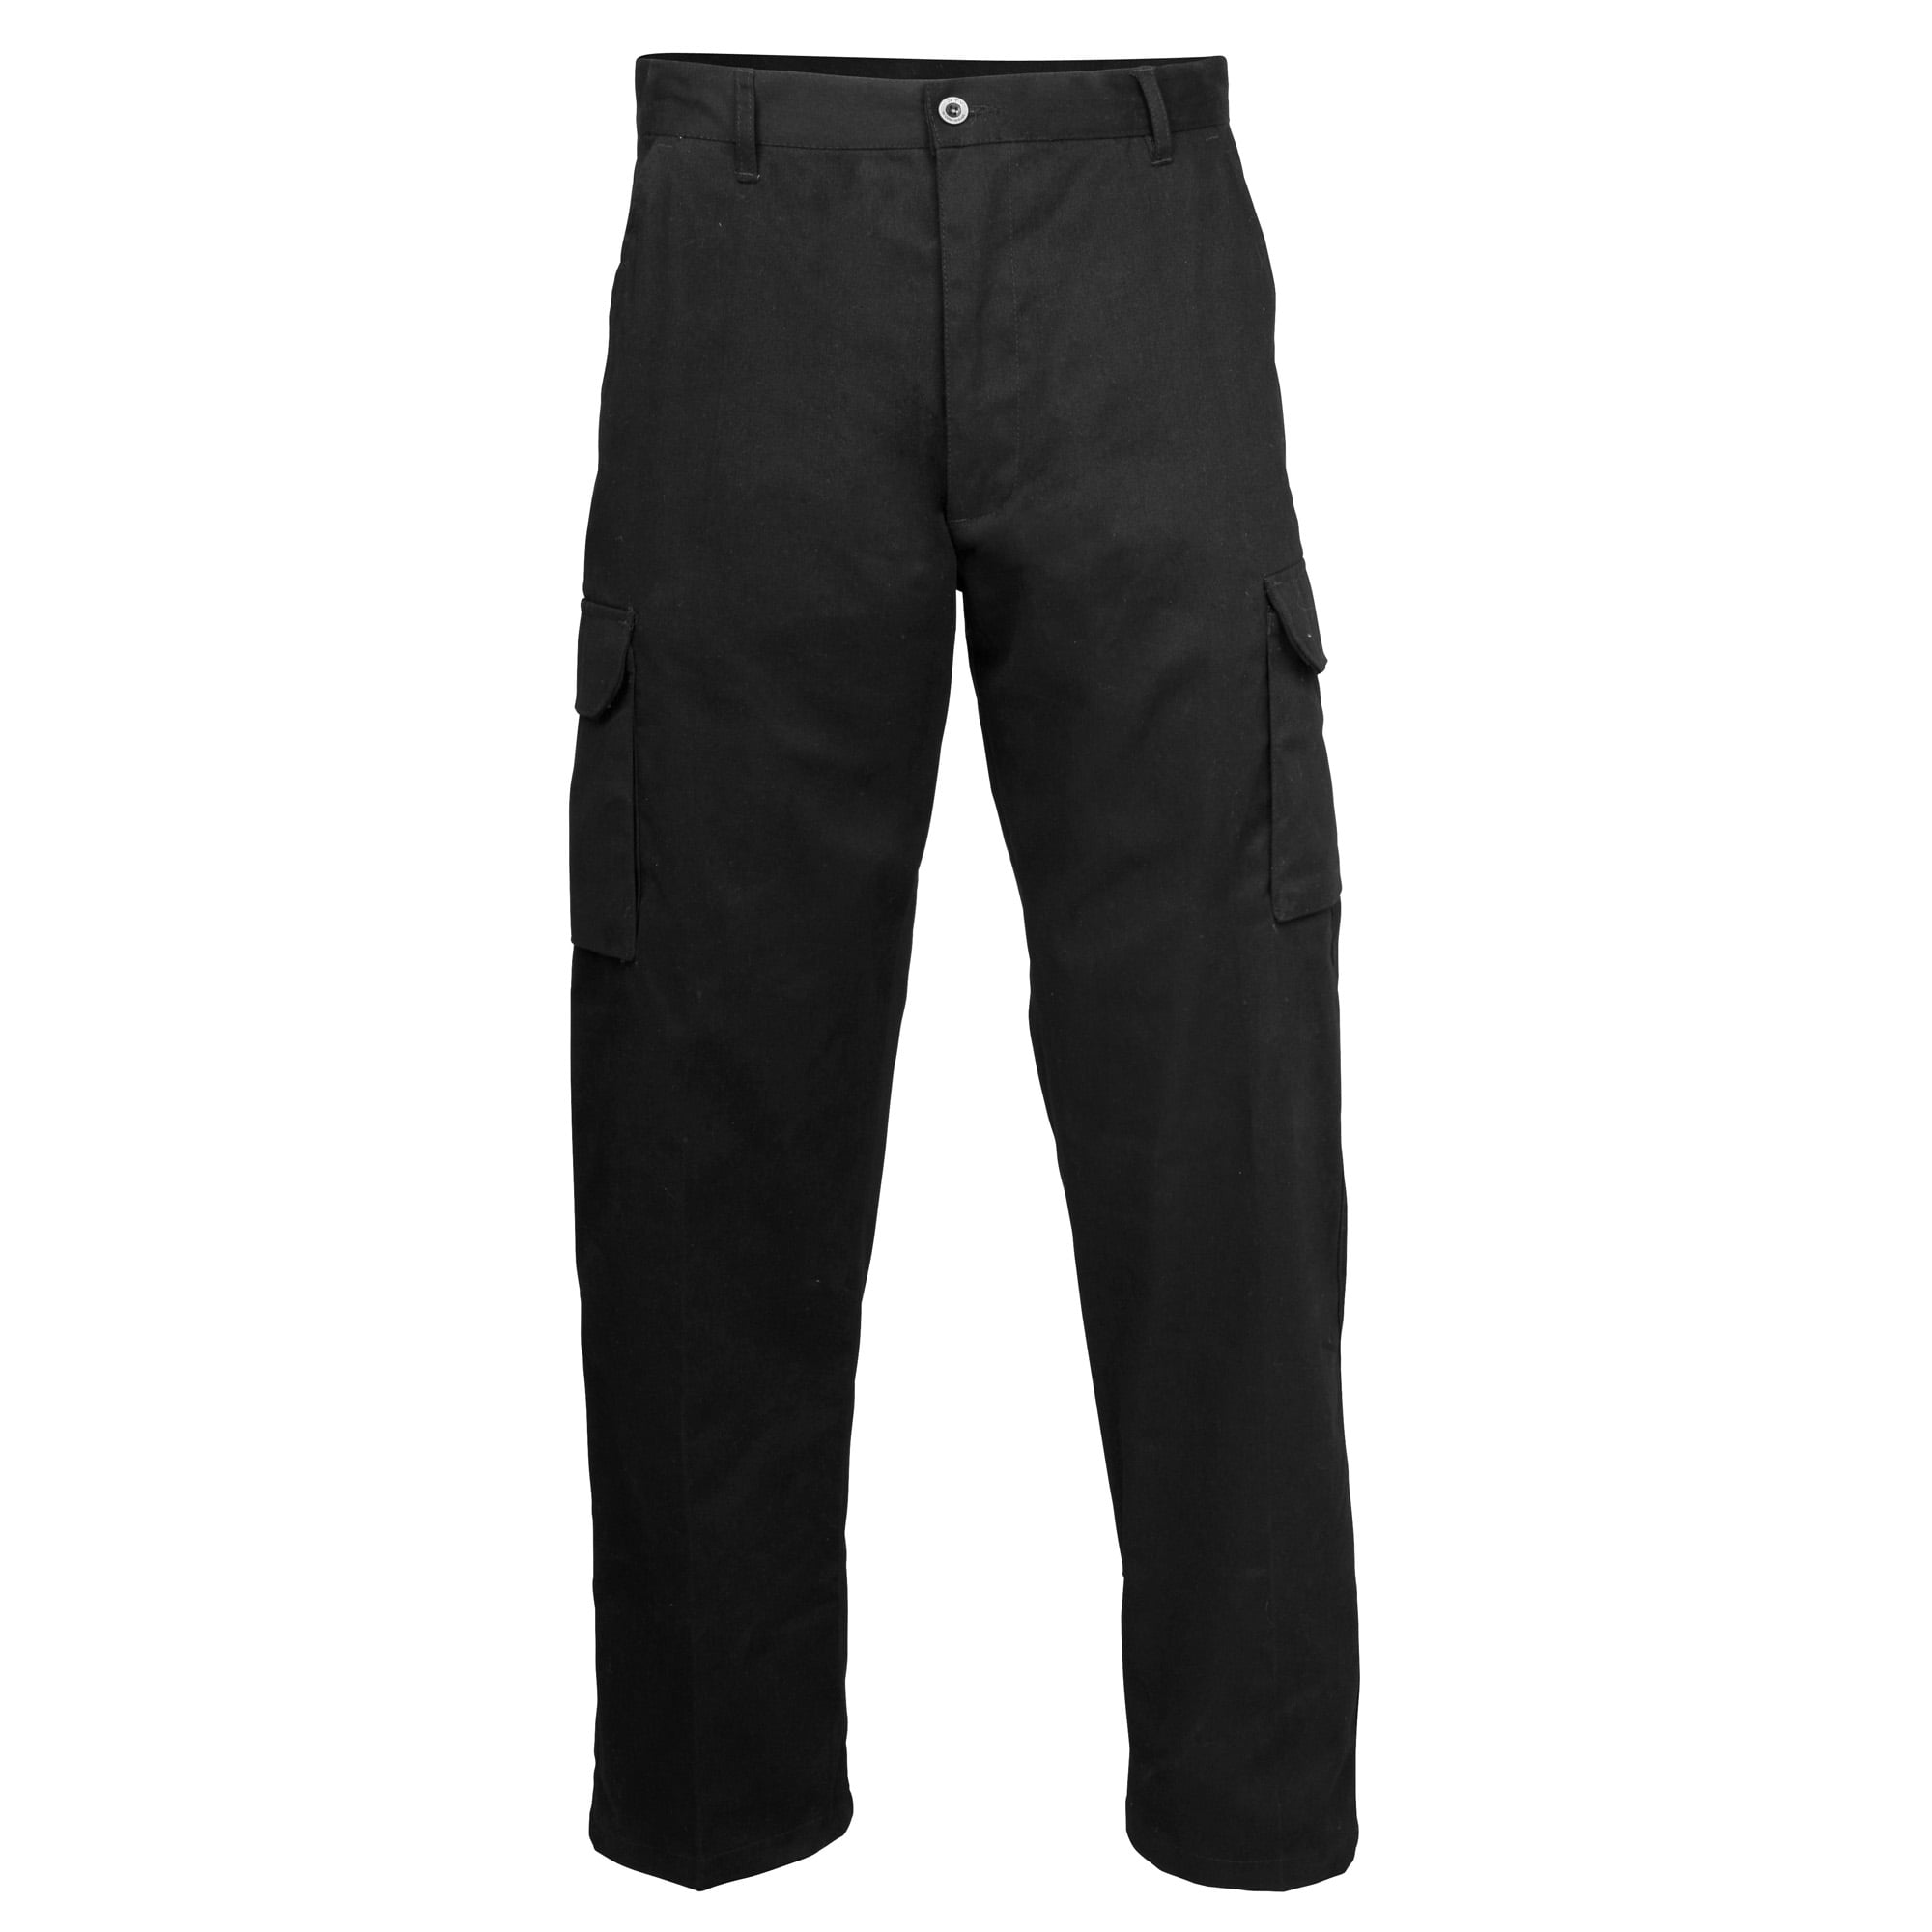 RTY Workwear Mens Cotton Cargo Trousers / Pants | Walmart Canada